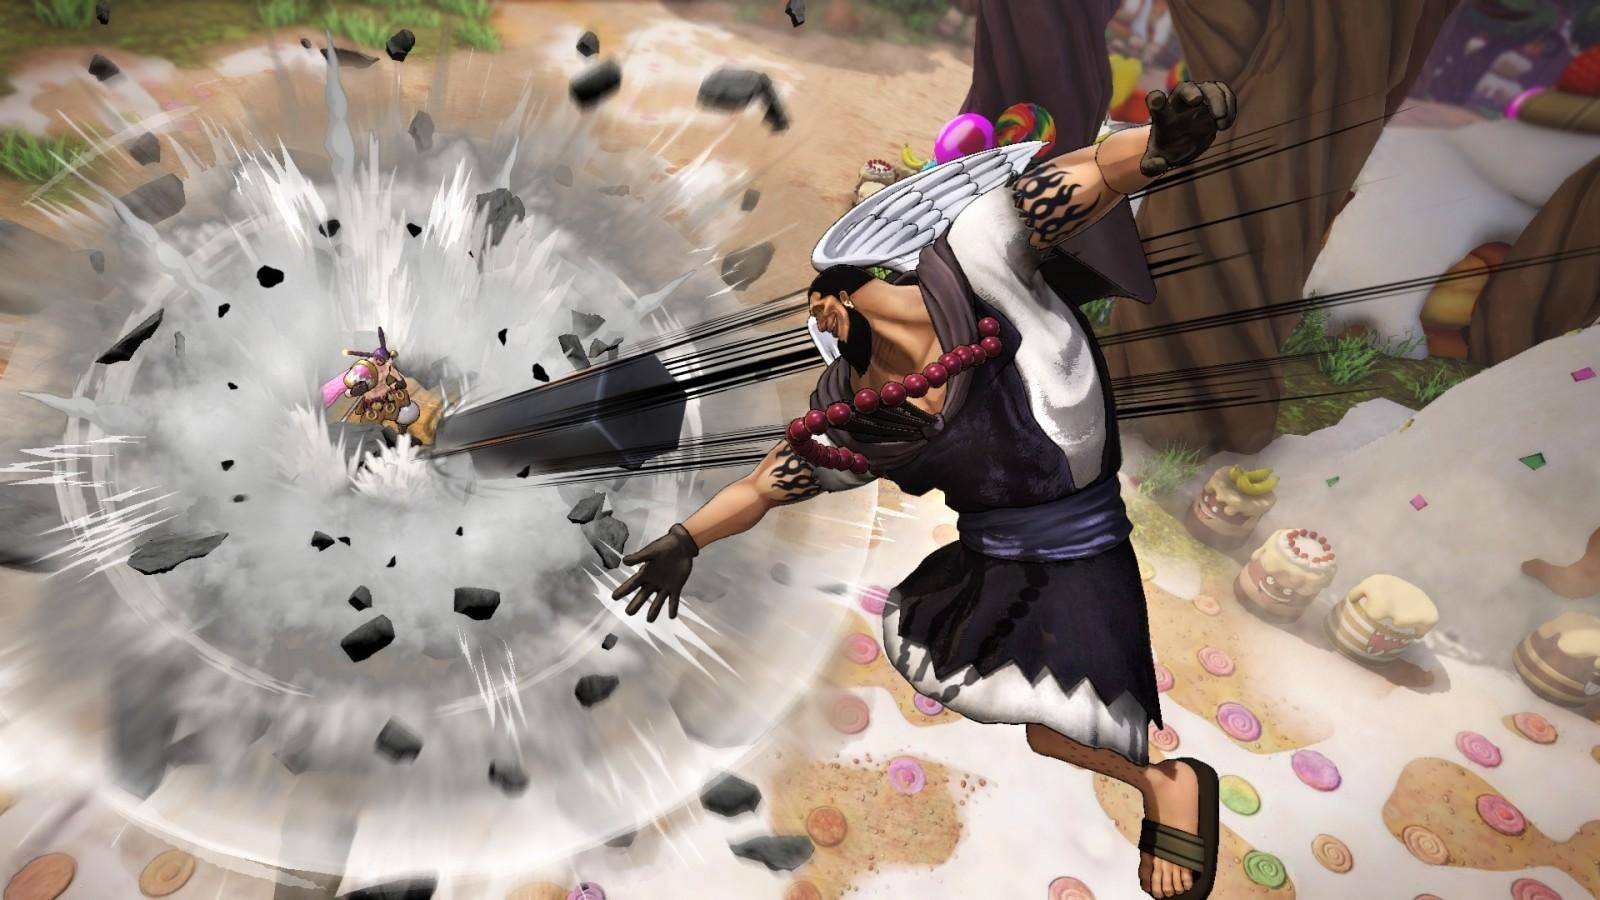 Urouge se une a One Piece: Pirate Warriors 4 5